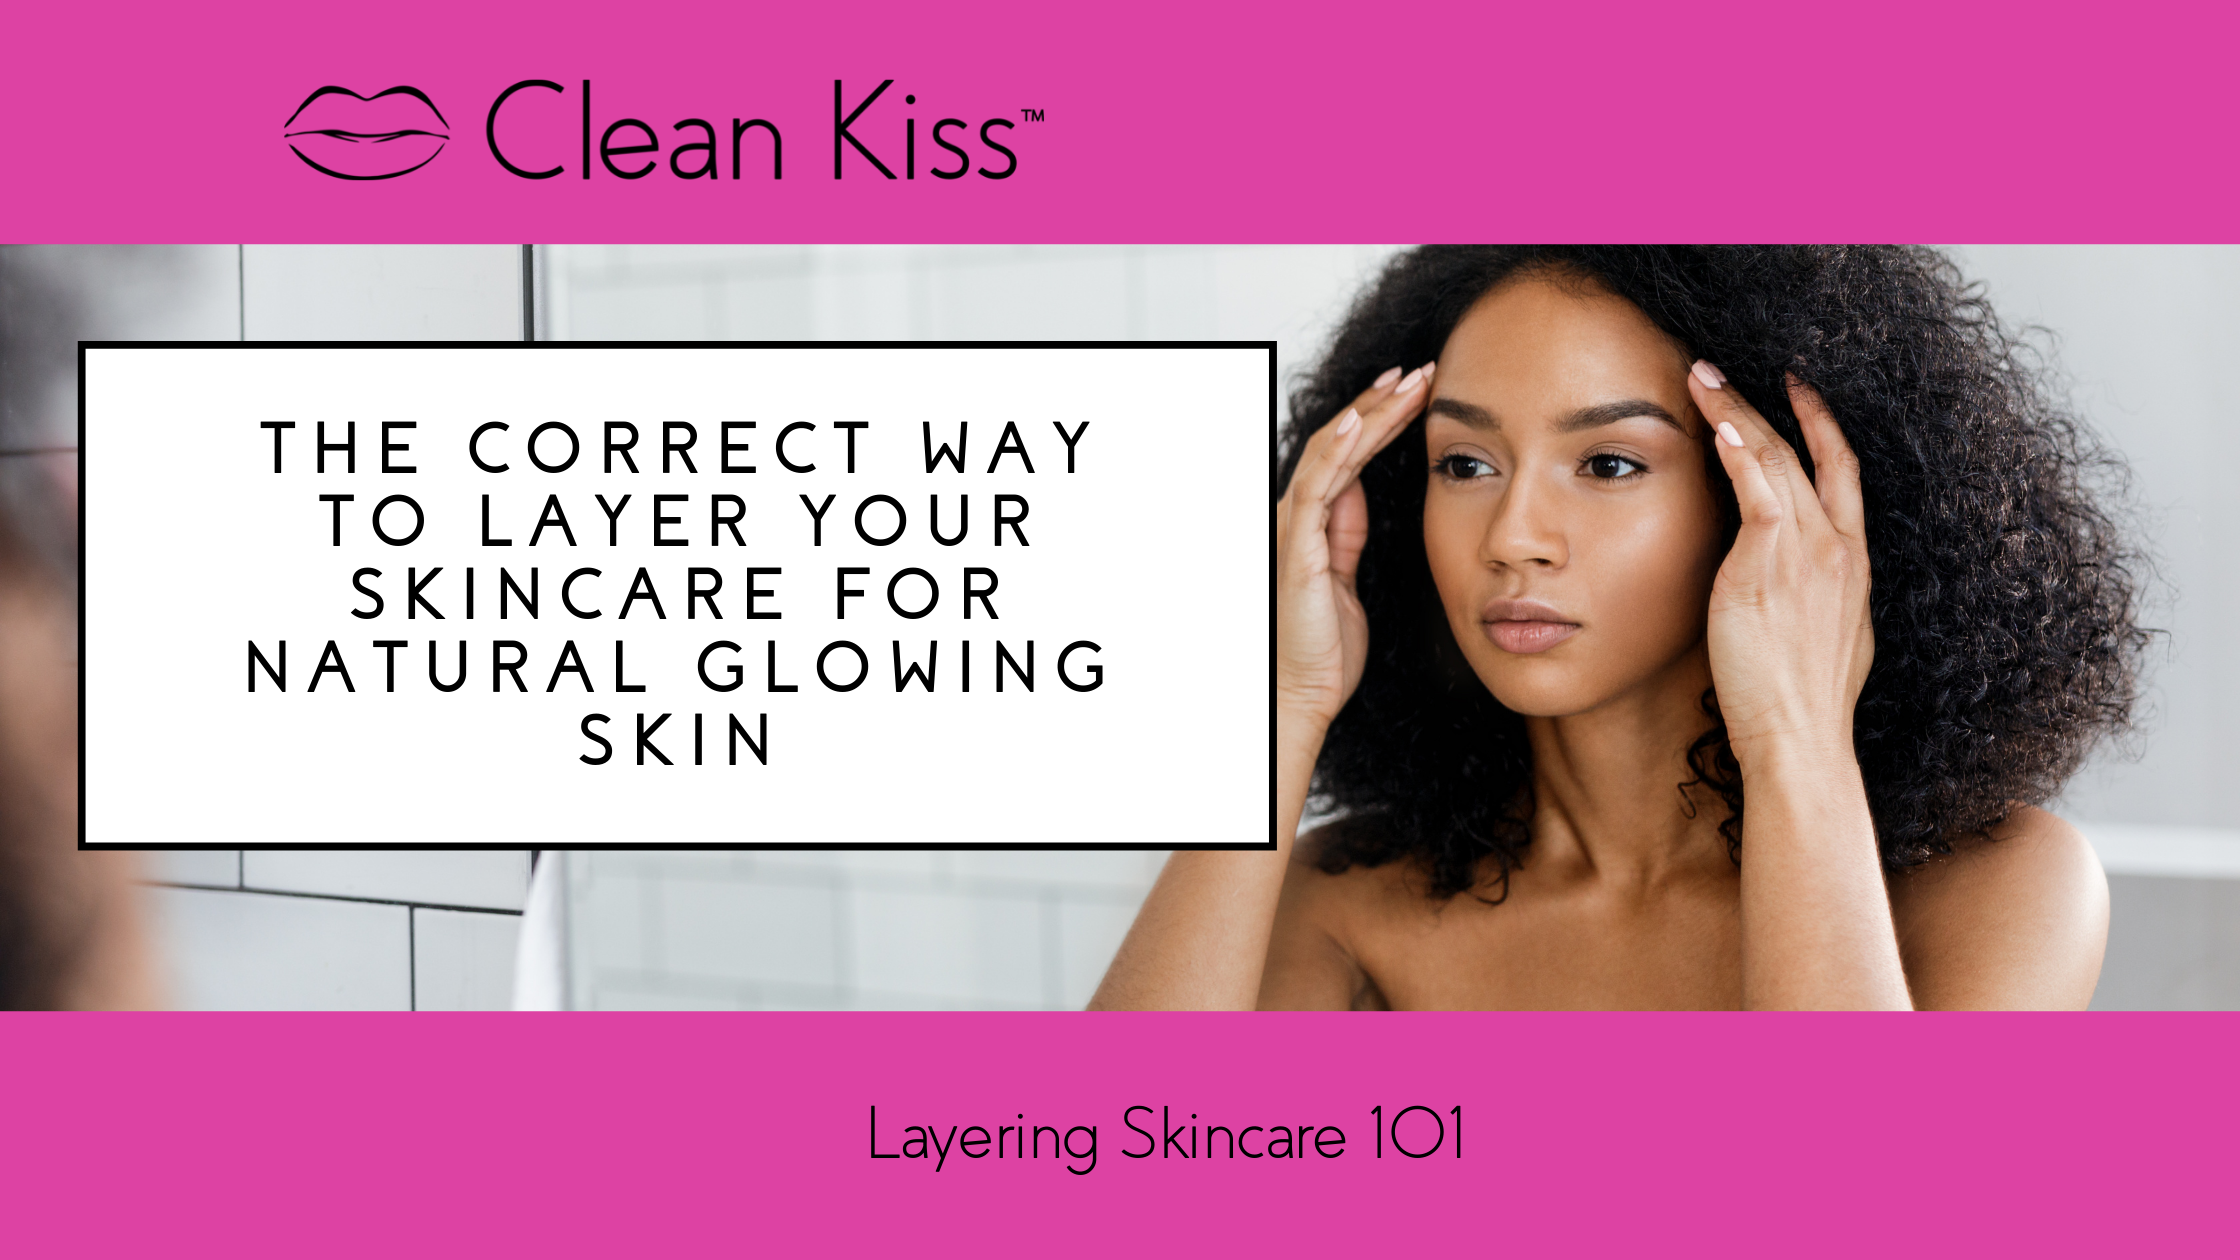 The Correct Way to Layer Your Skincare for Natural Glowing Skin